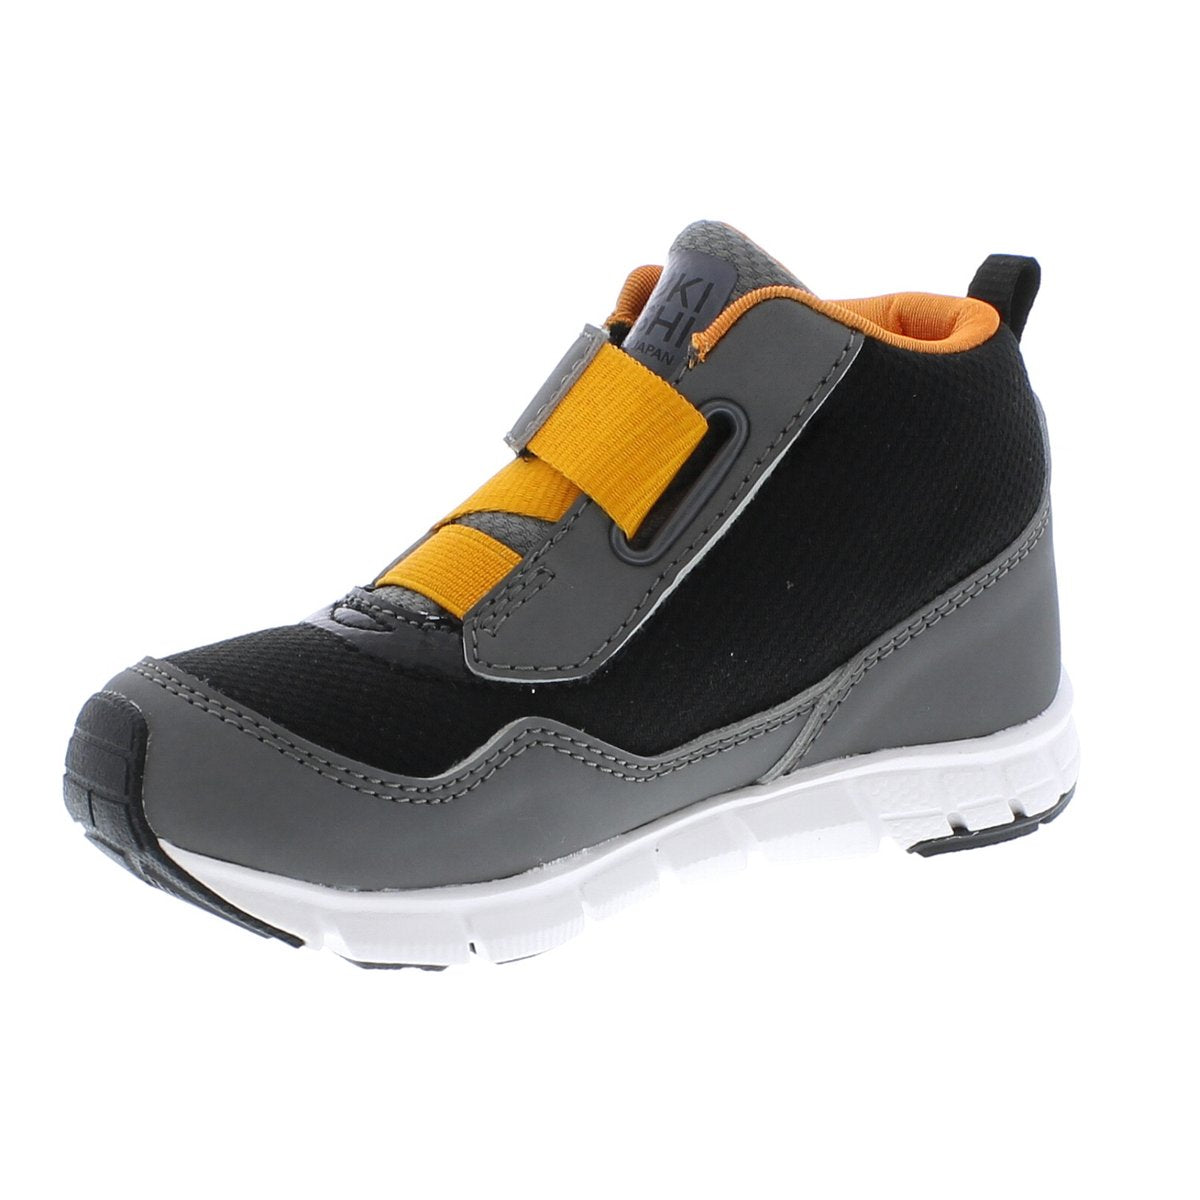 Child Tsukihoshi Tokyo Sneaker in Gray/Orange from the front view